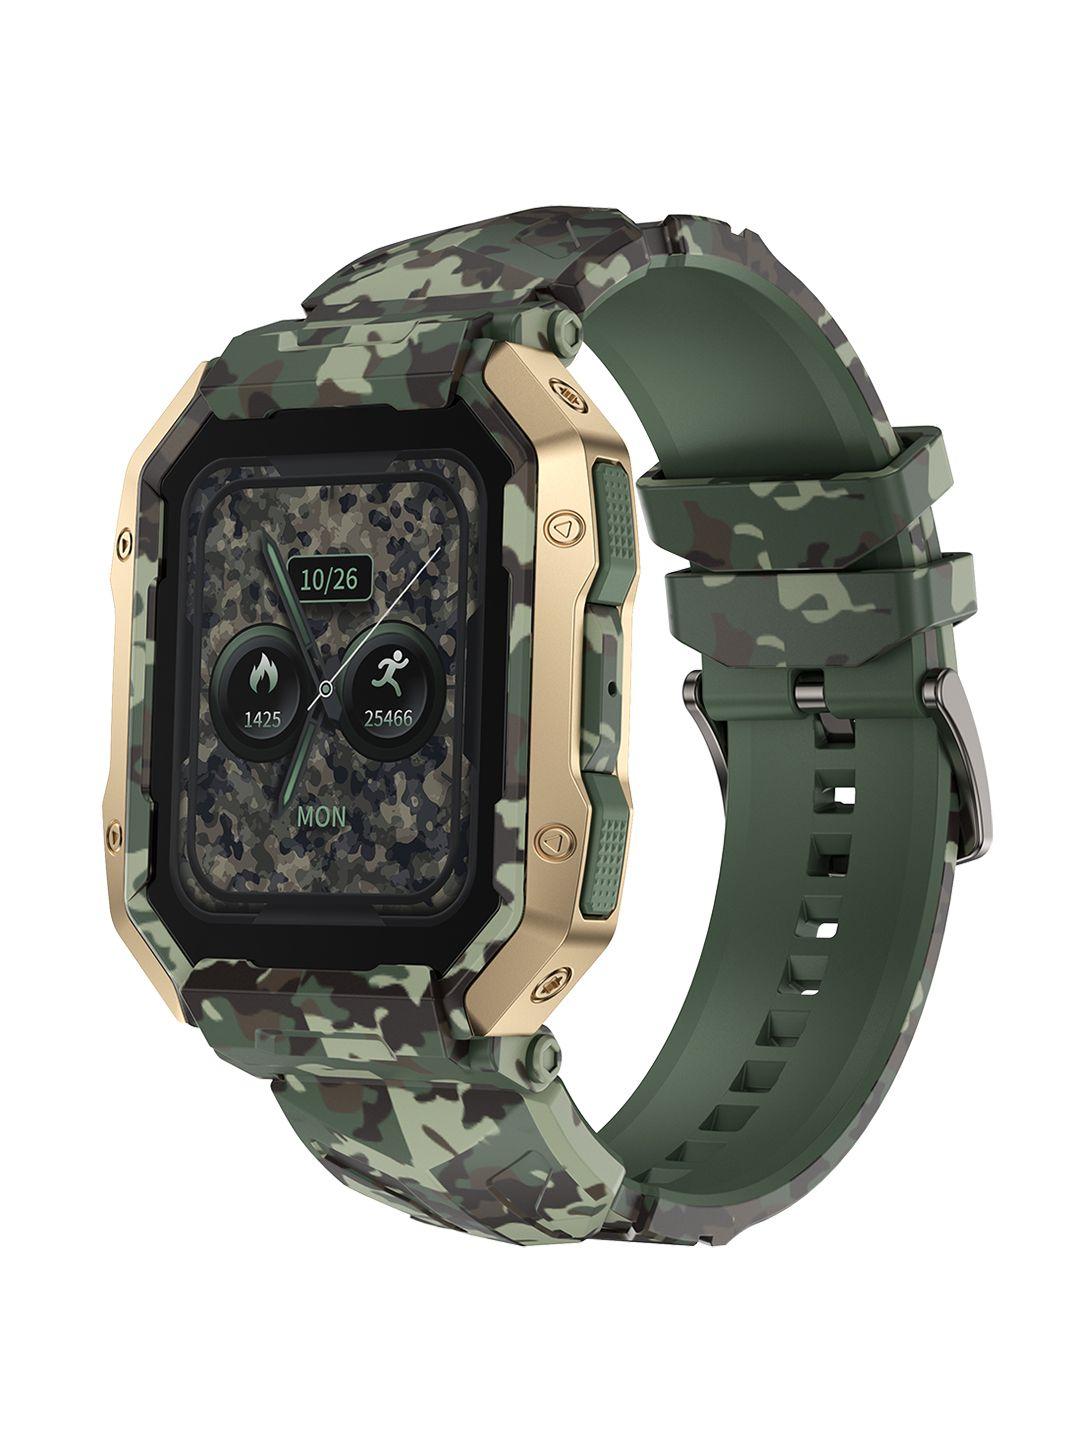 fire-boltt cobra 1.78 inch amoled army grade build with bluetooth calling smartwatch